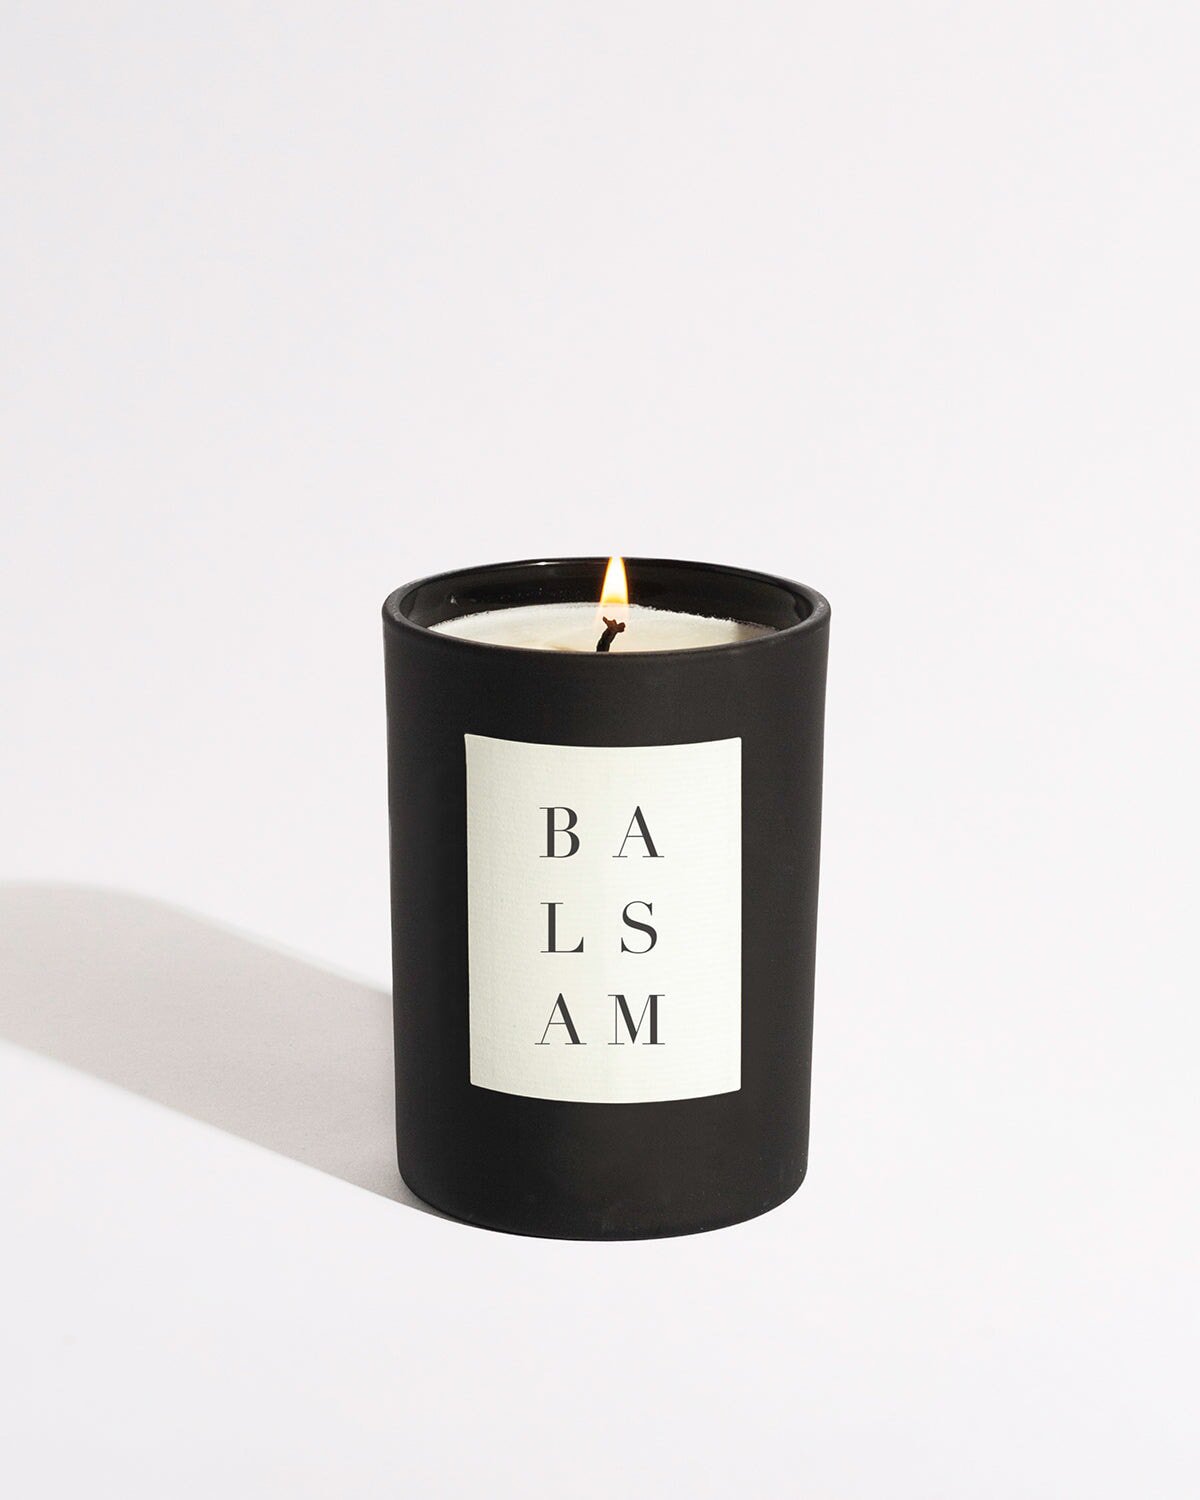 A lit candle, housed in a sleek black container with a white label that vertically reads "BALSAM," emits a warm glow. This eco-friendly Balsam Noir Candle by Brooklyn Candle Studio is crafted from soy wax, set against a plain white background.